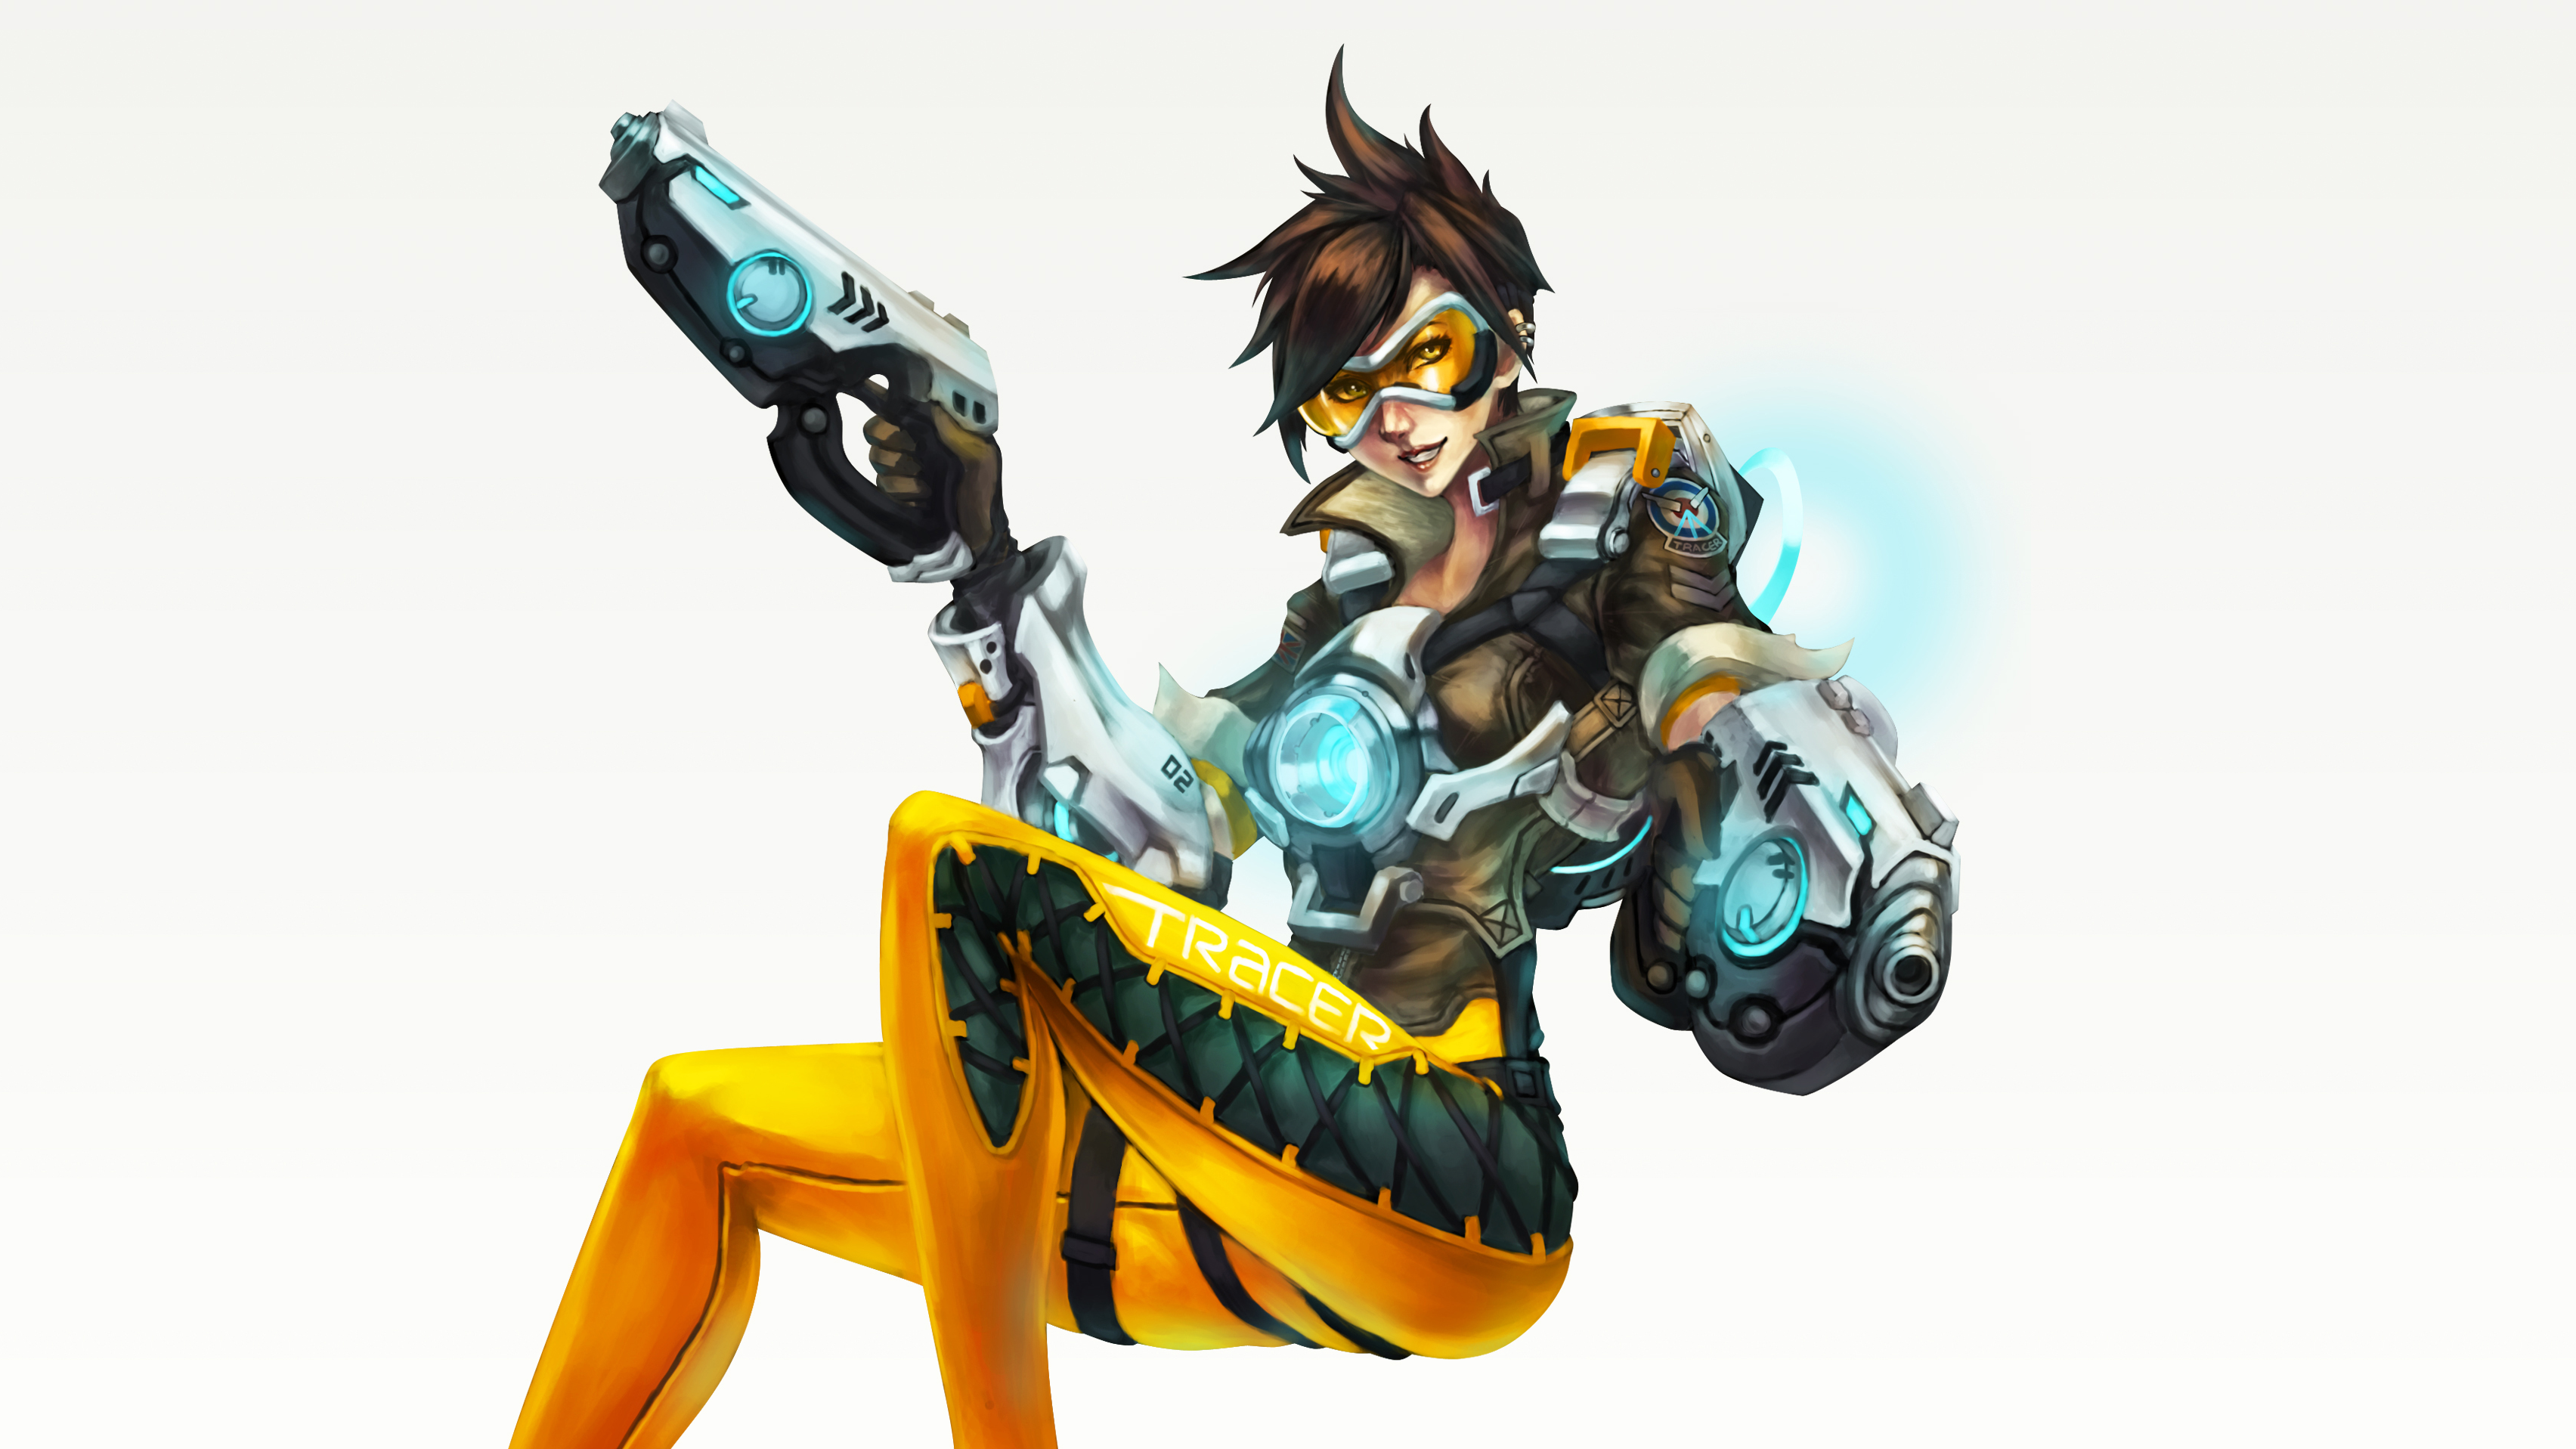 General 3408x1917 video games PC gaming simple background Overwatch video game girls video game characters girls with guns white background